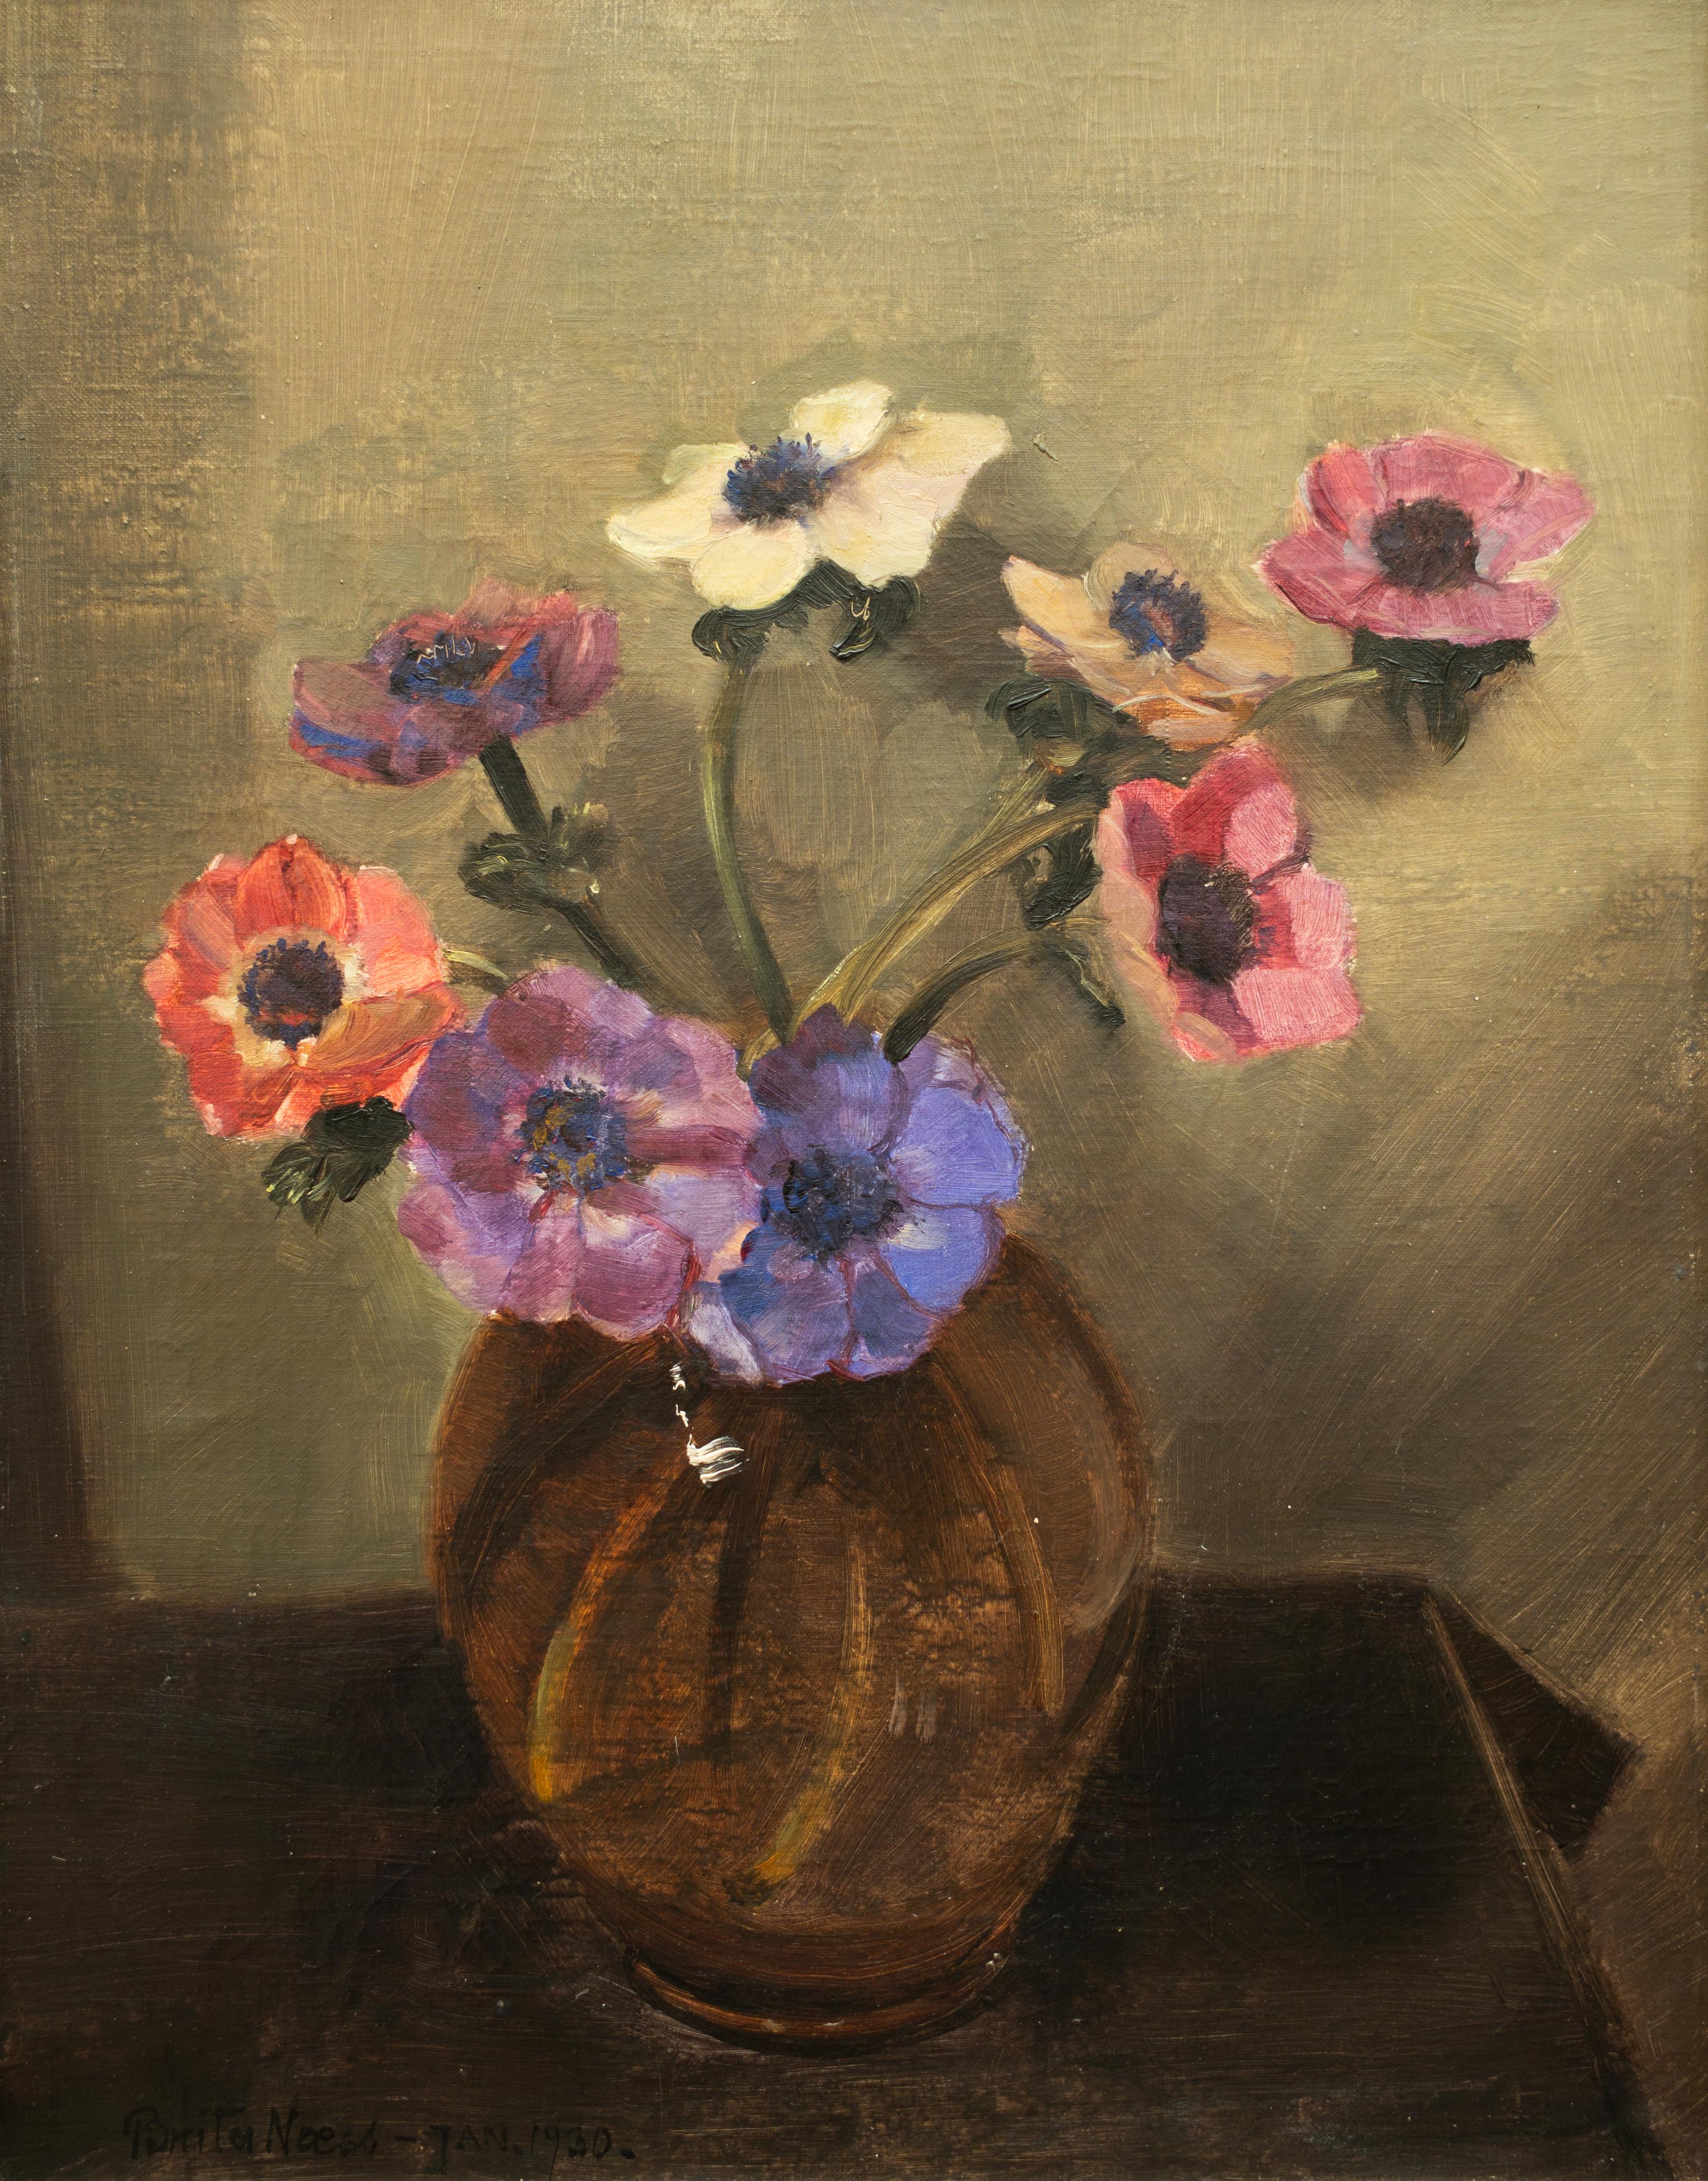 Brita Næss (1901-1965) Swedish

Title: Vase with Flowers 

oil on canvas
signed and dated: Brita Naess - JAN. 1930.
canvas dimensions 17.71 x 13.97 inches (45 x 35.5 cm)
frame 24.40 x 20.47 inches (62 x 52 cm)

Provenance: 
A Swedish Private